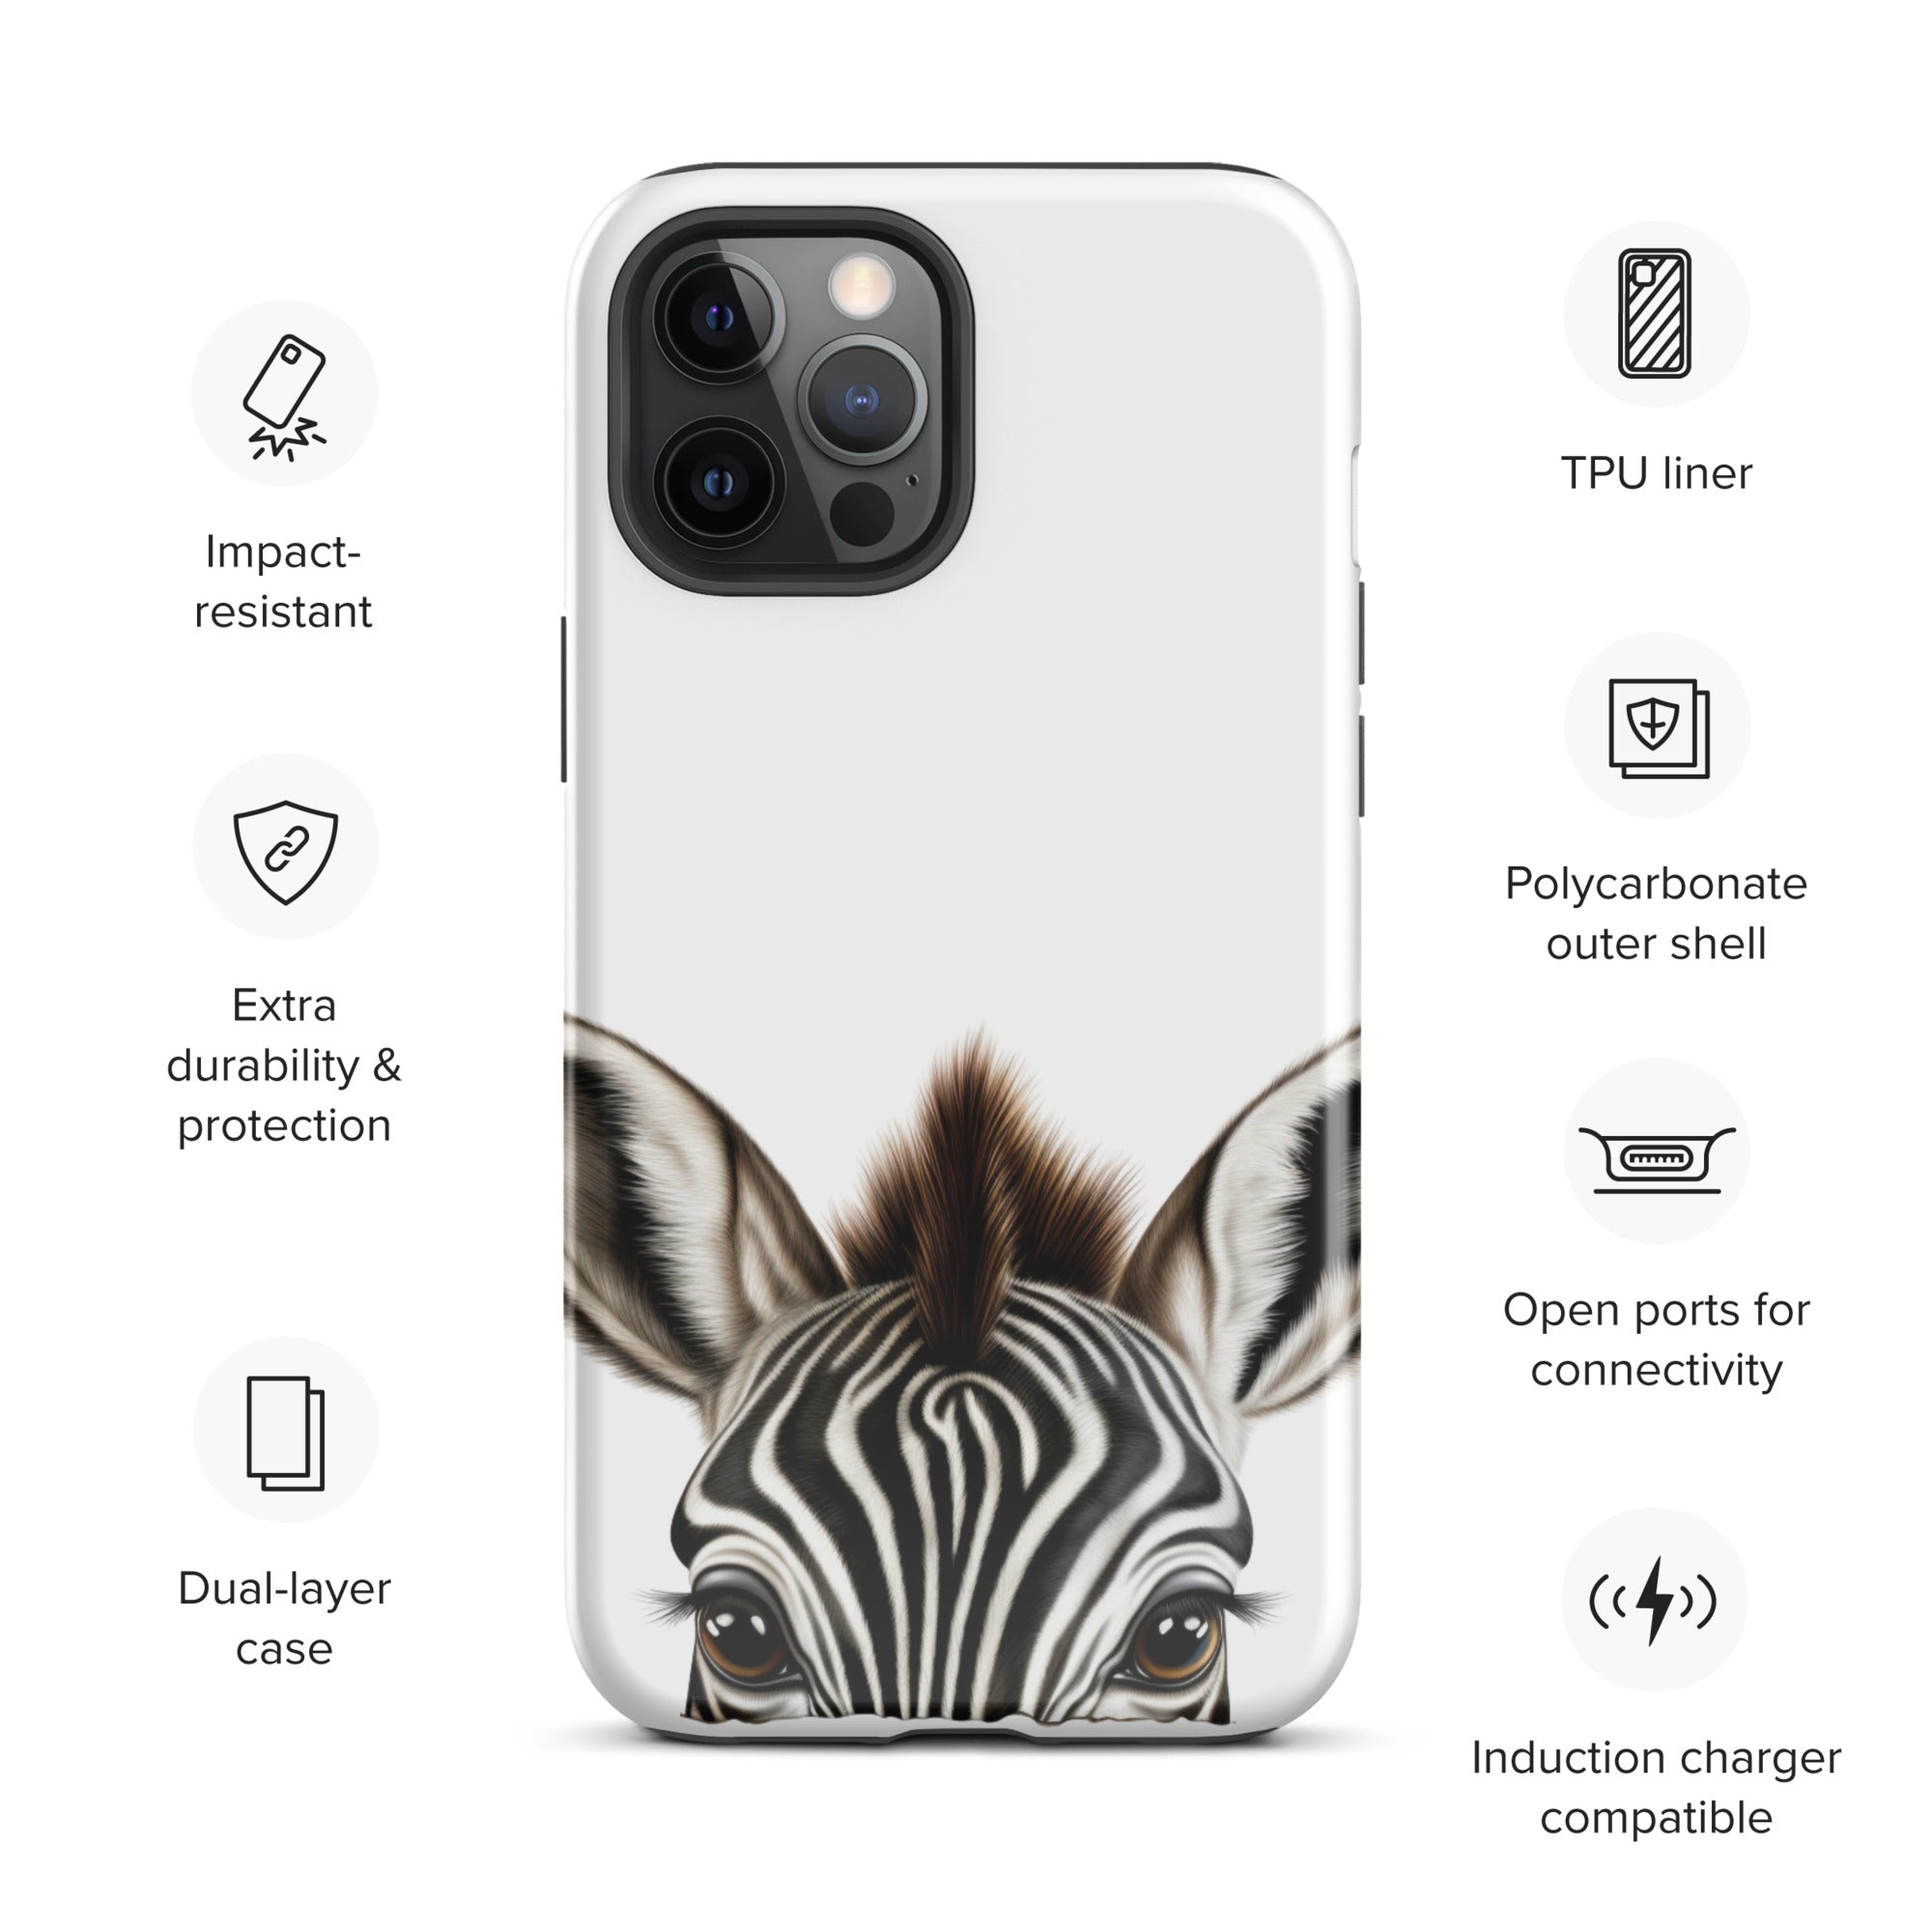 tough-case-for-iphone-glossy-iphone-12-pro-max-front-656e073e98747.jpg